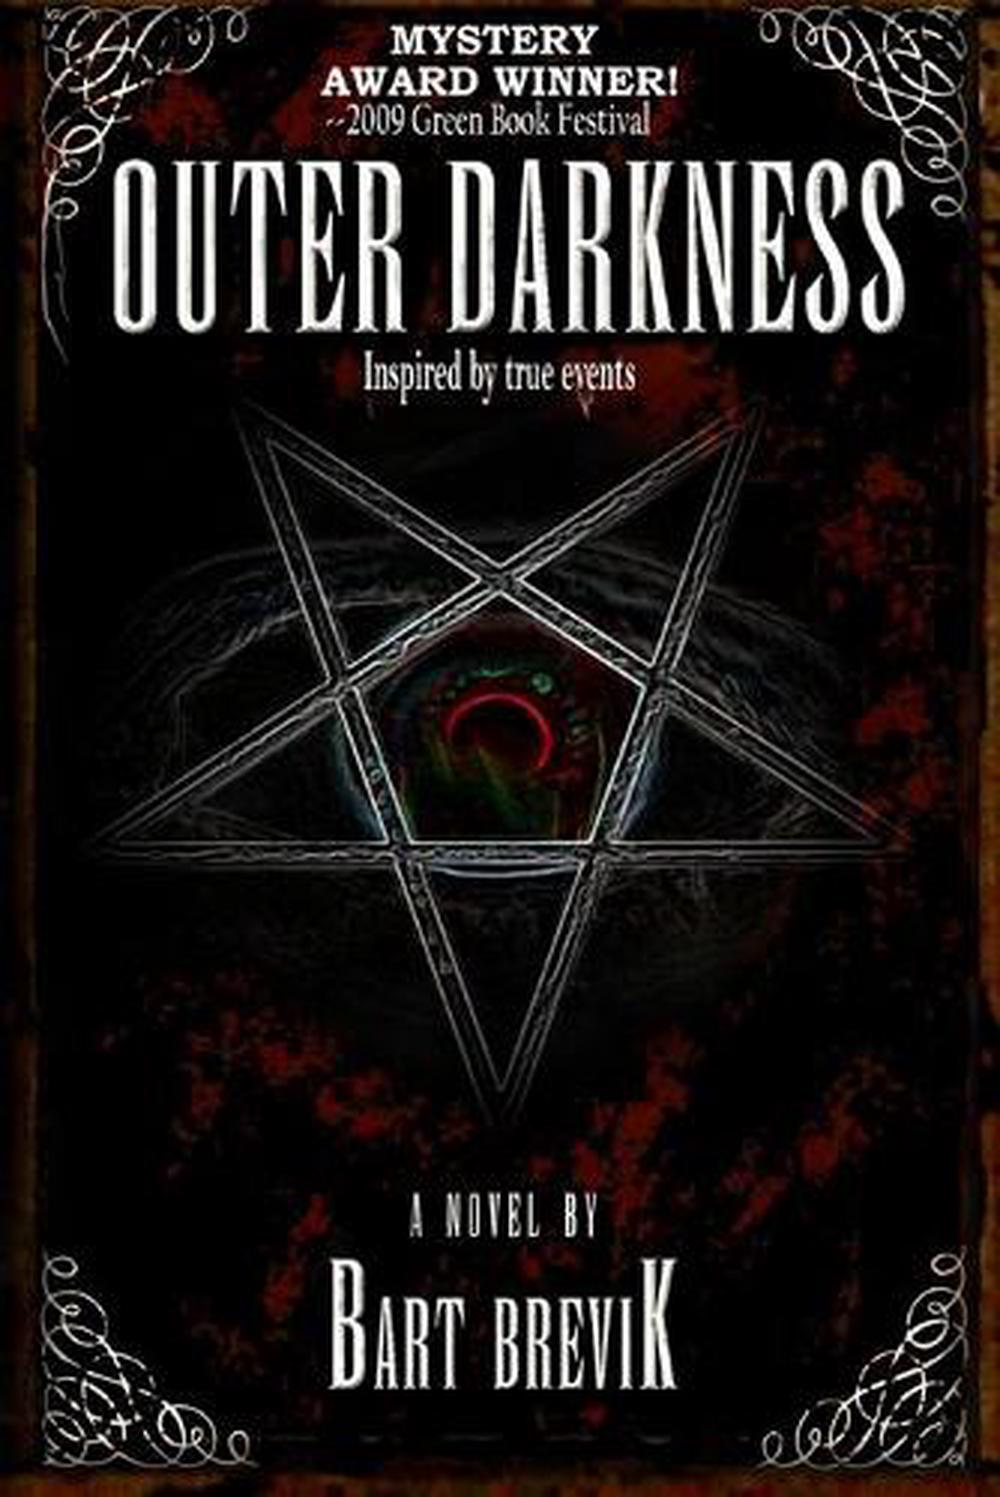 Outer Darkness, Vol. 1 by John Layman